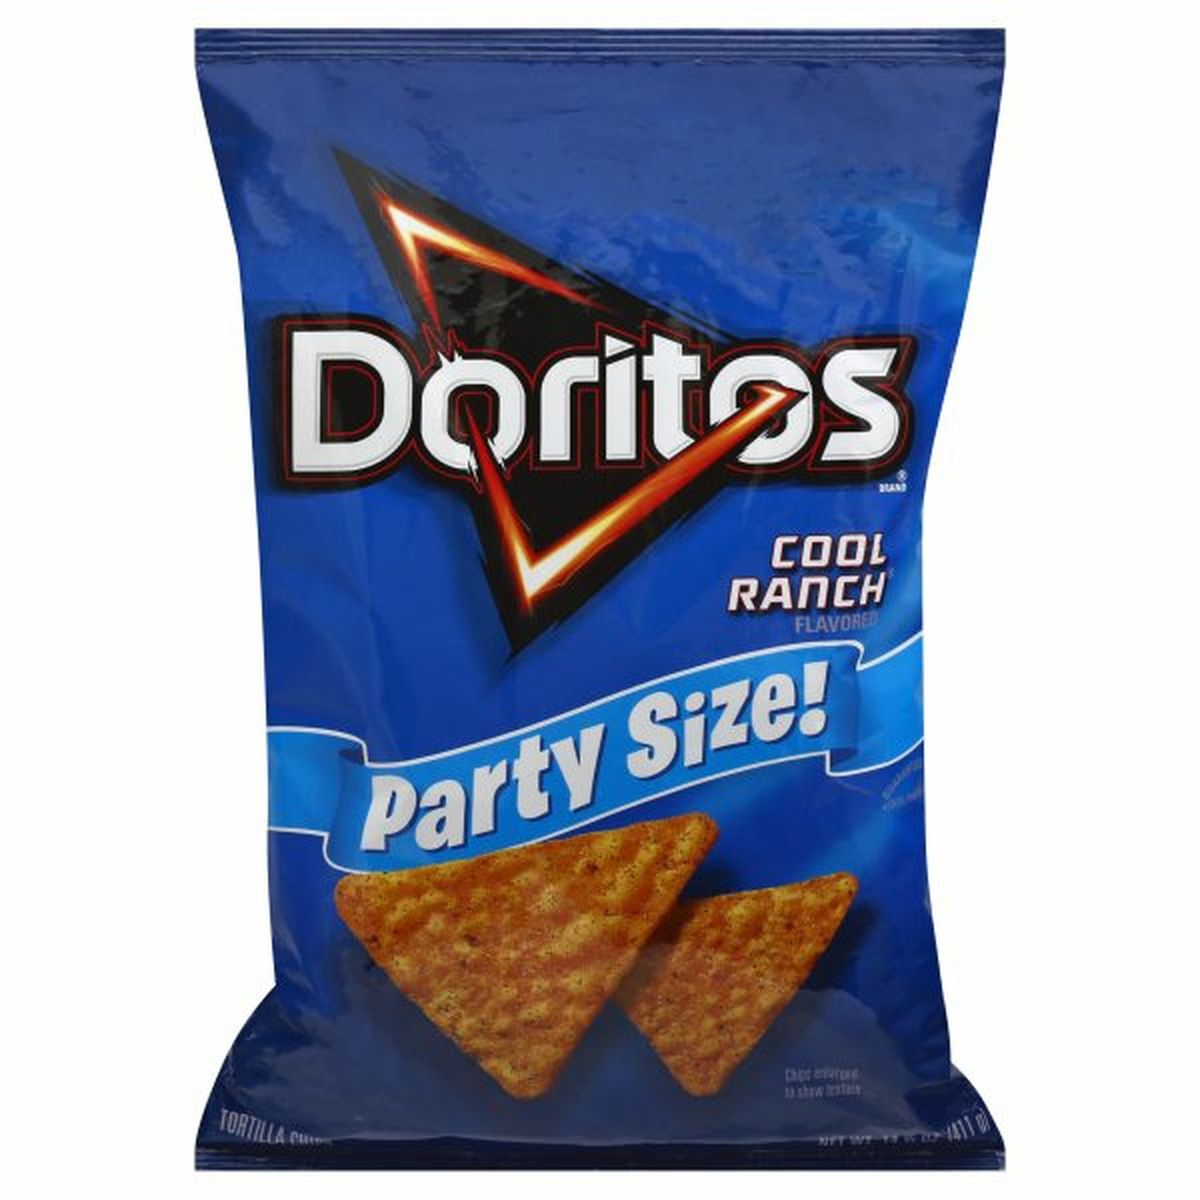 Calories in Doritos Tortilla Chips, Cool Ranch Flavored, Party Size!